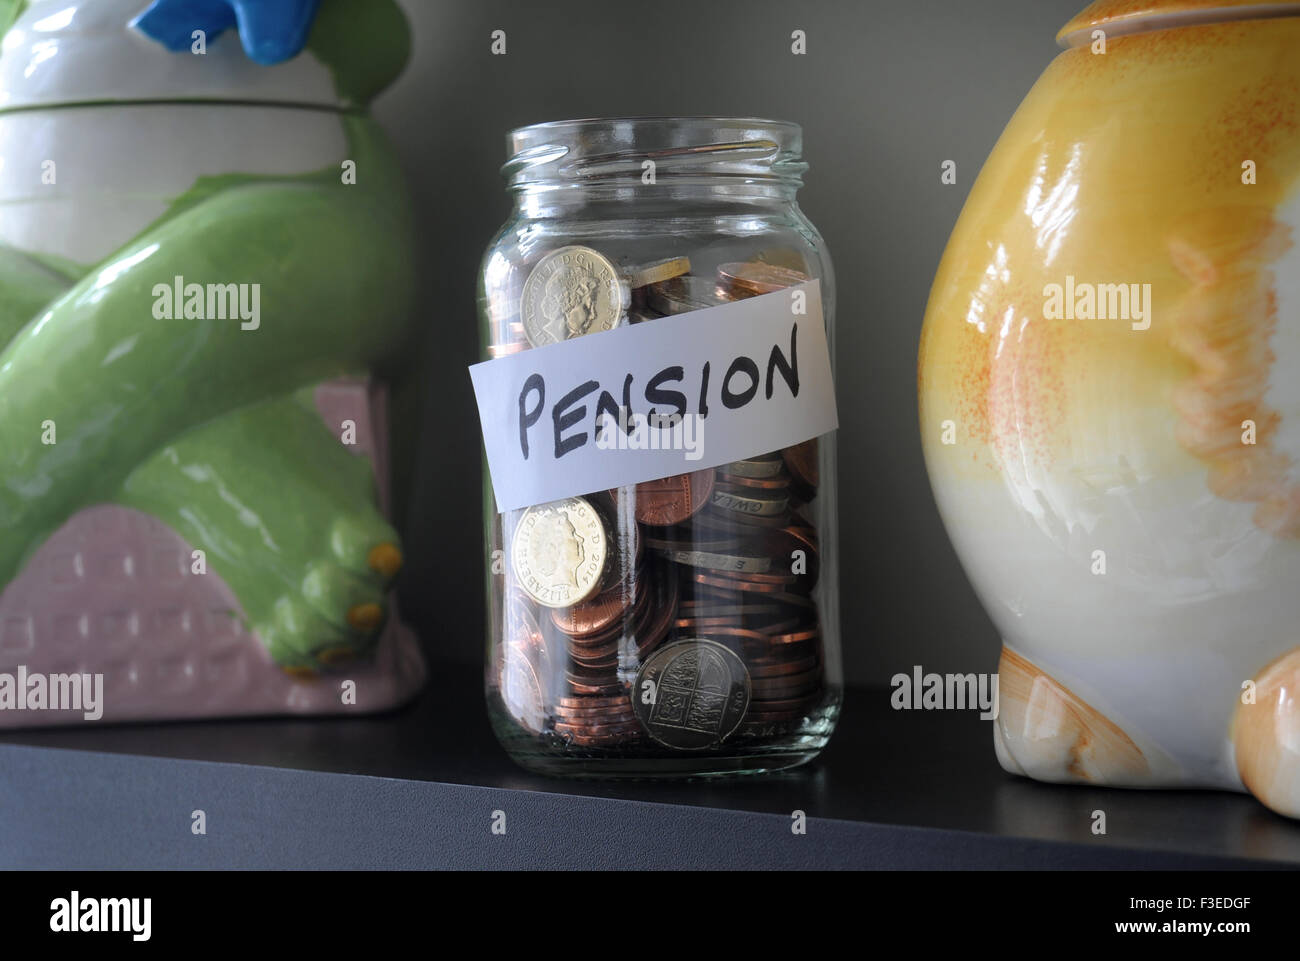 GLASS JAR WITH MONEY AND PENSION SIGN  ON SHELF RE PENSIONS PRIVATE COMPANY SAVERS SAVINGS OLD AGE RETIREMENT PLAN PLANNING UK Stock Photo